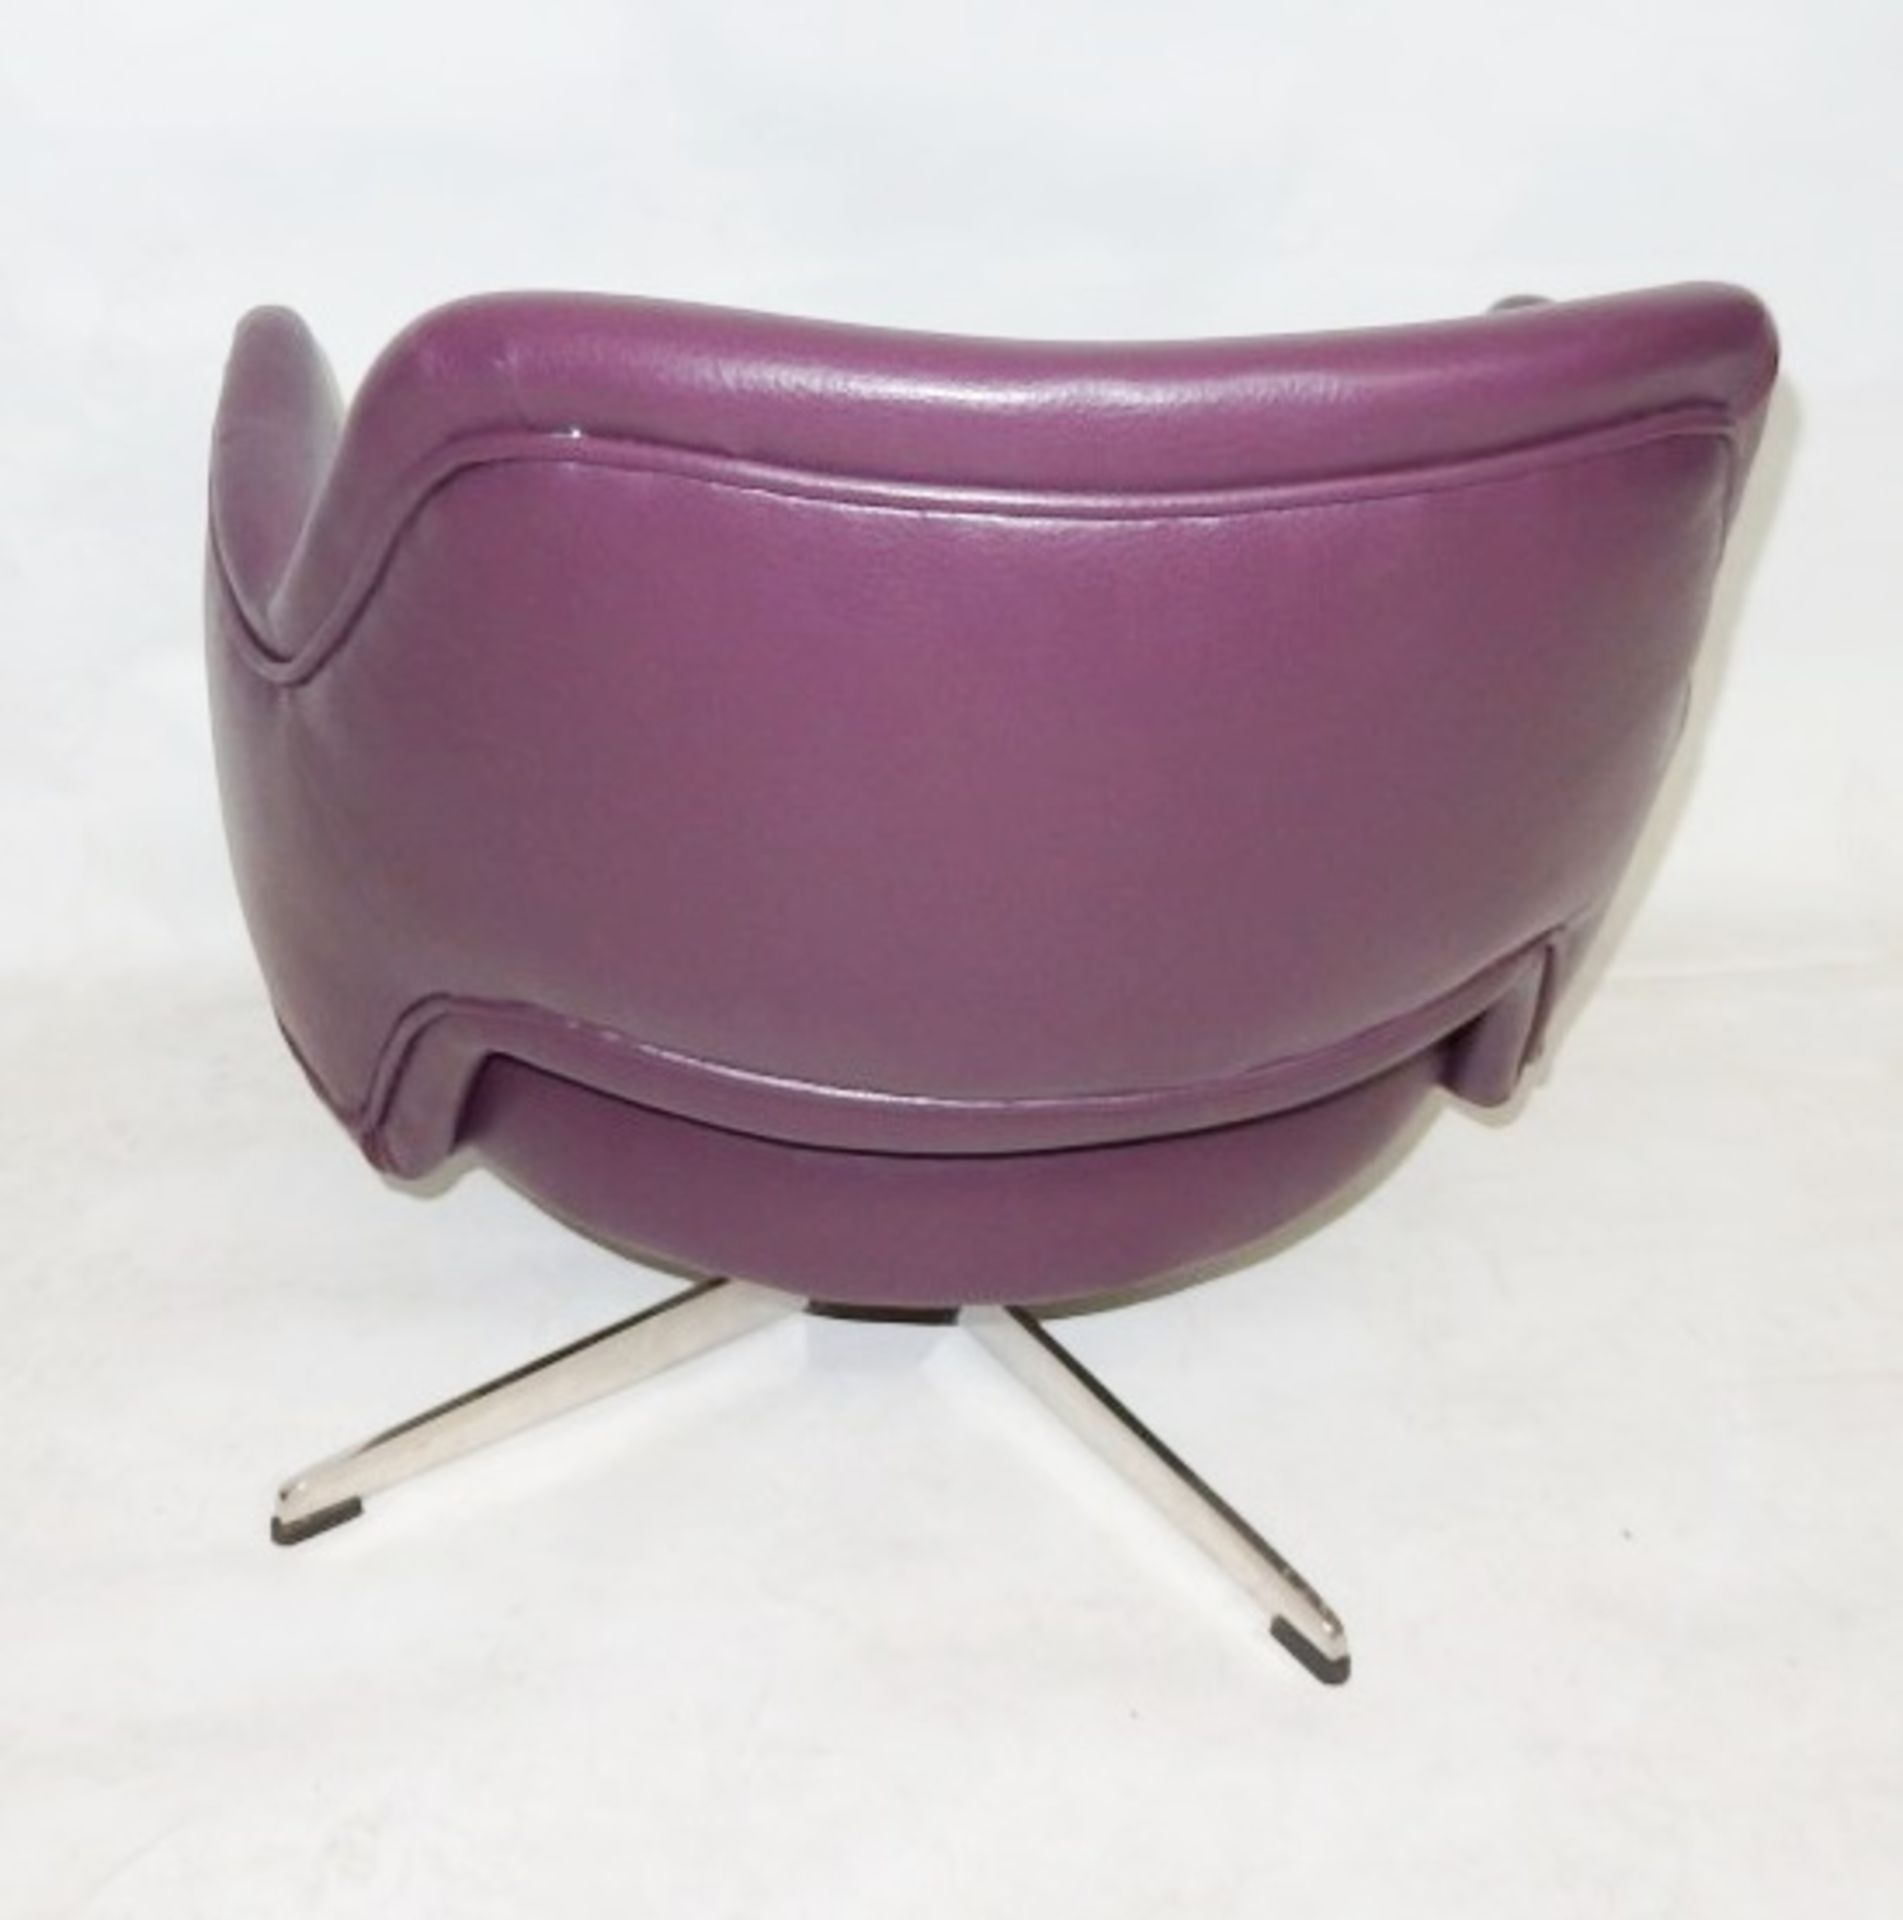 1 x Low Profile Swivel Chair Upholstered In A Rich Plum Leather - Dimensions: W60 x D50 x H62cm - - Image 2 of 4